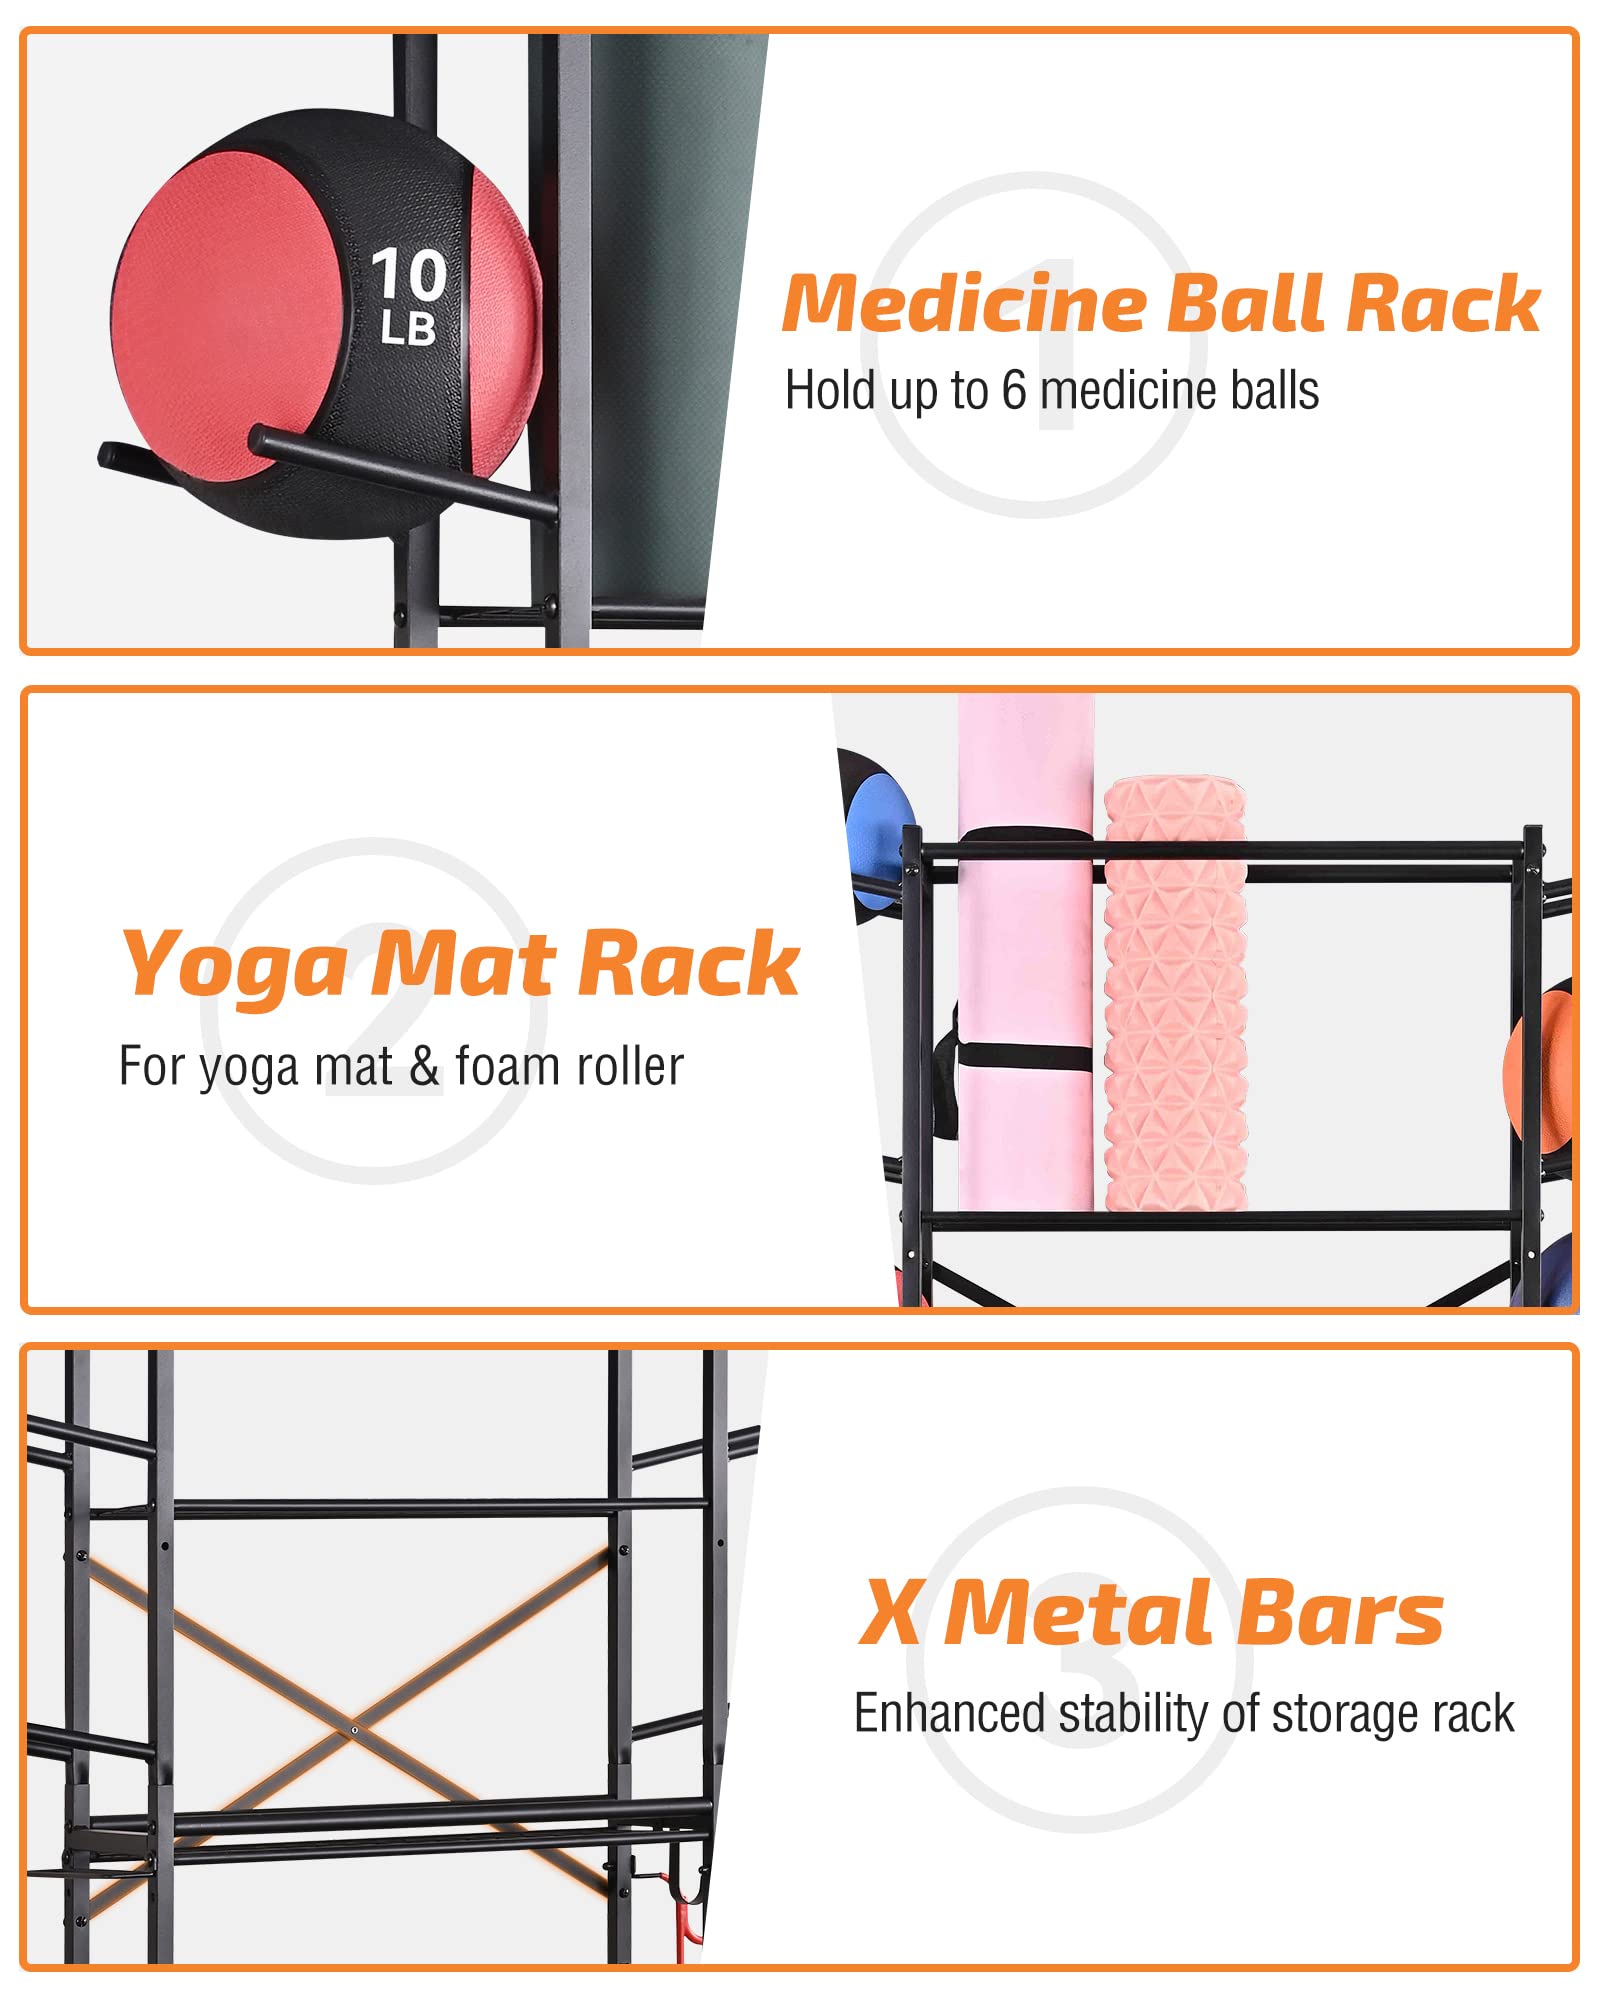 PLKOW Weight Rack for Dumbbells, Kettlebells, Yoga Mat and Balls With Extra Top Organizer